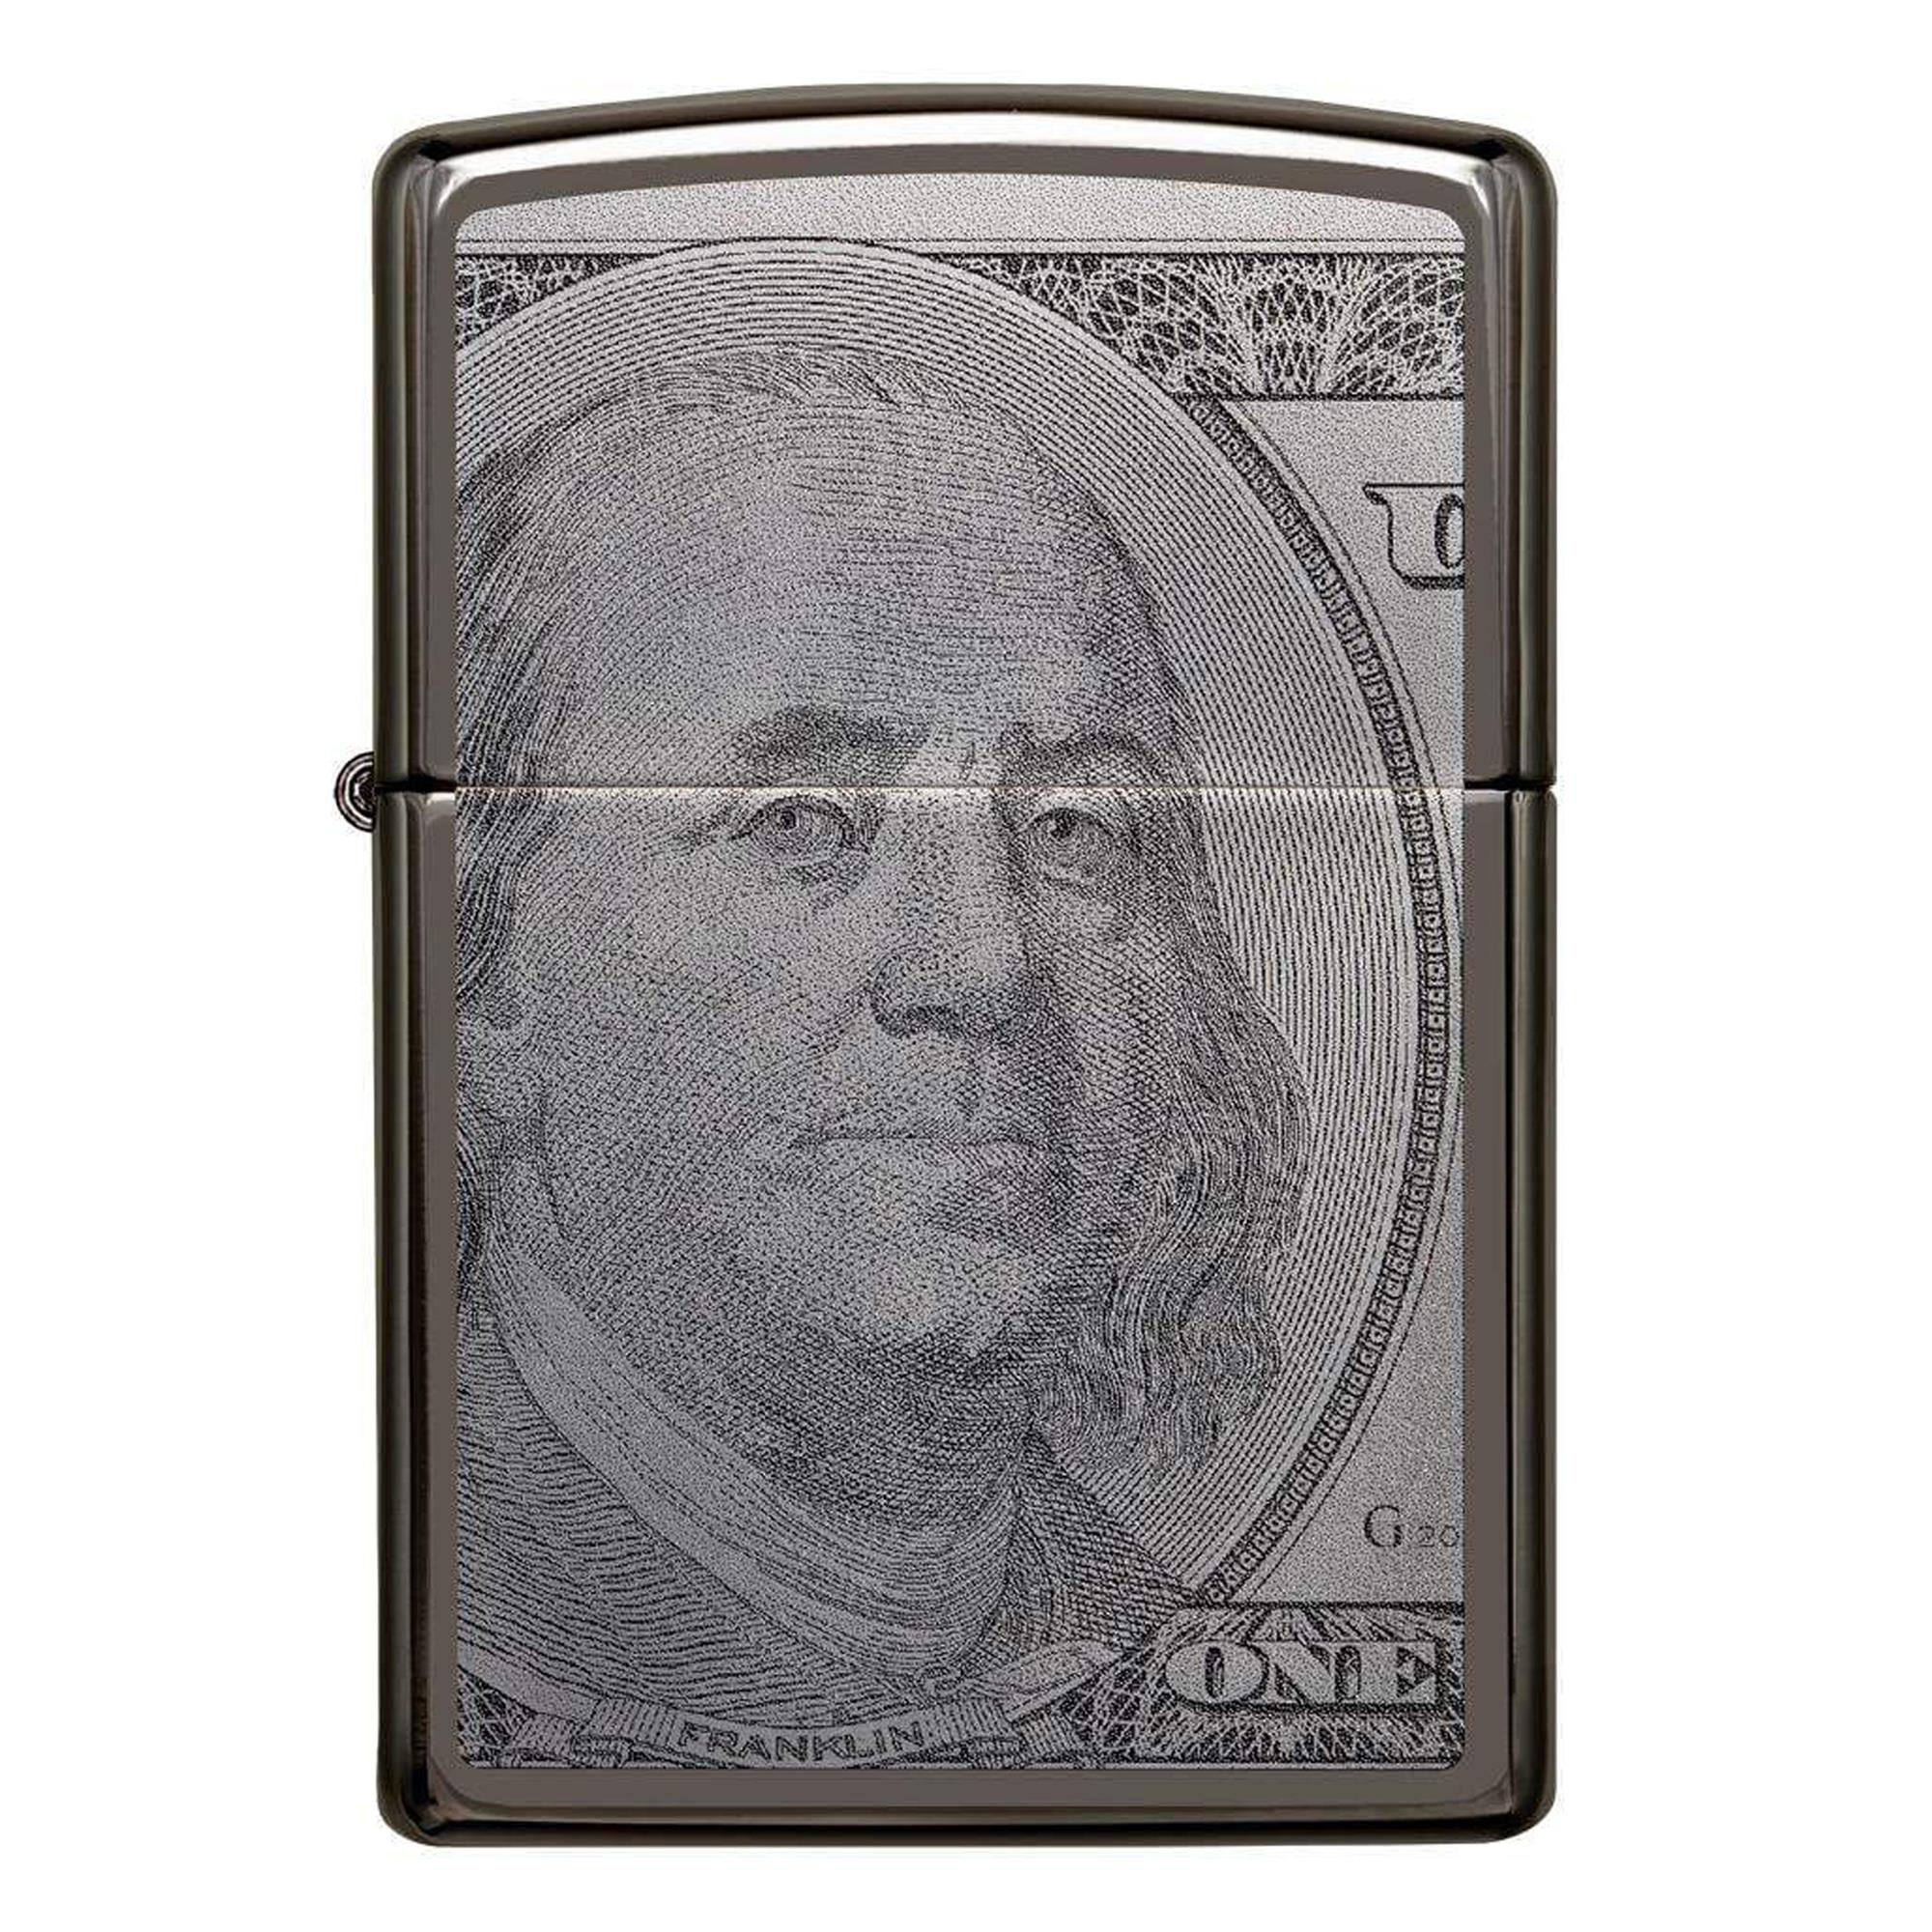 ZIPPO CURRENCY DESIGN